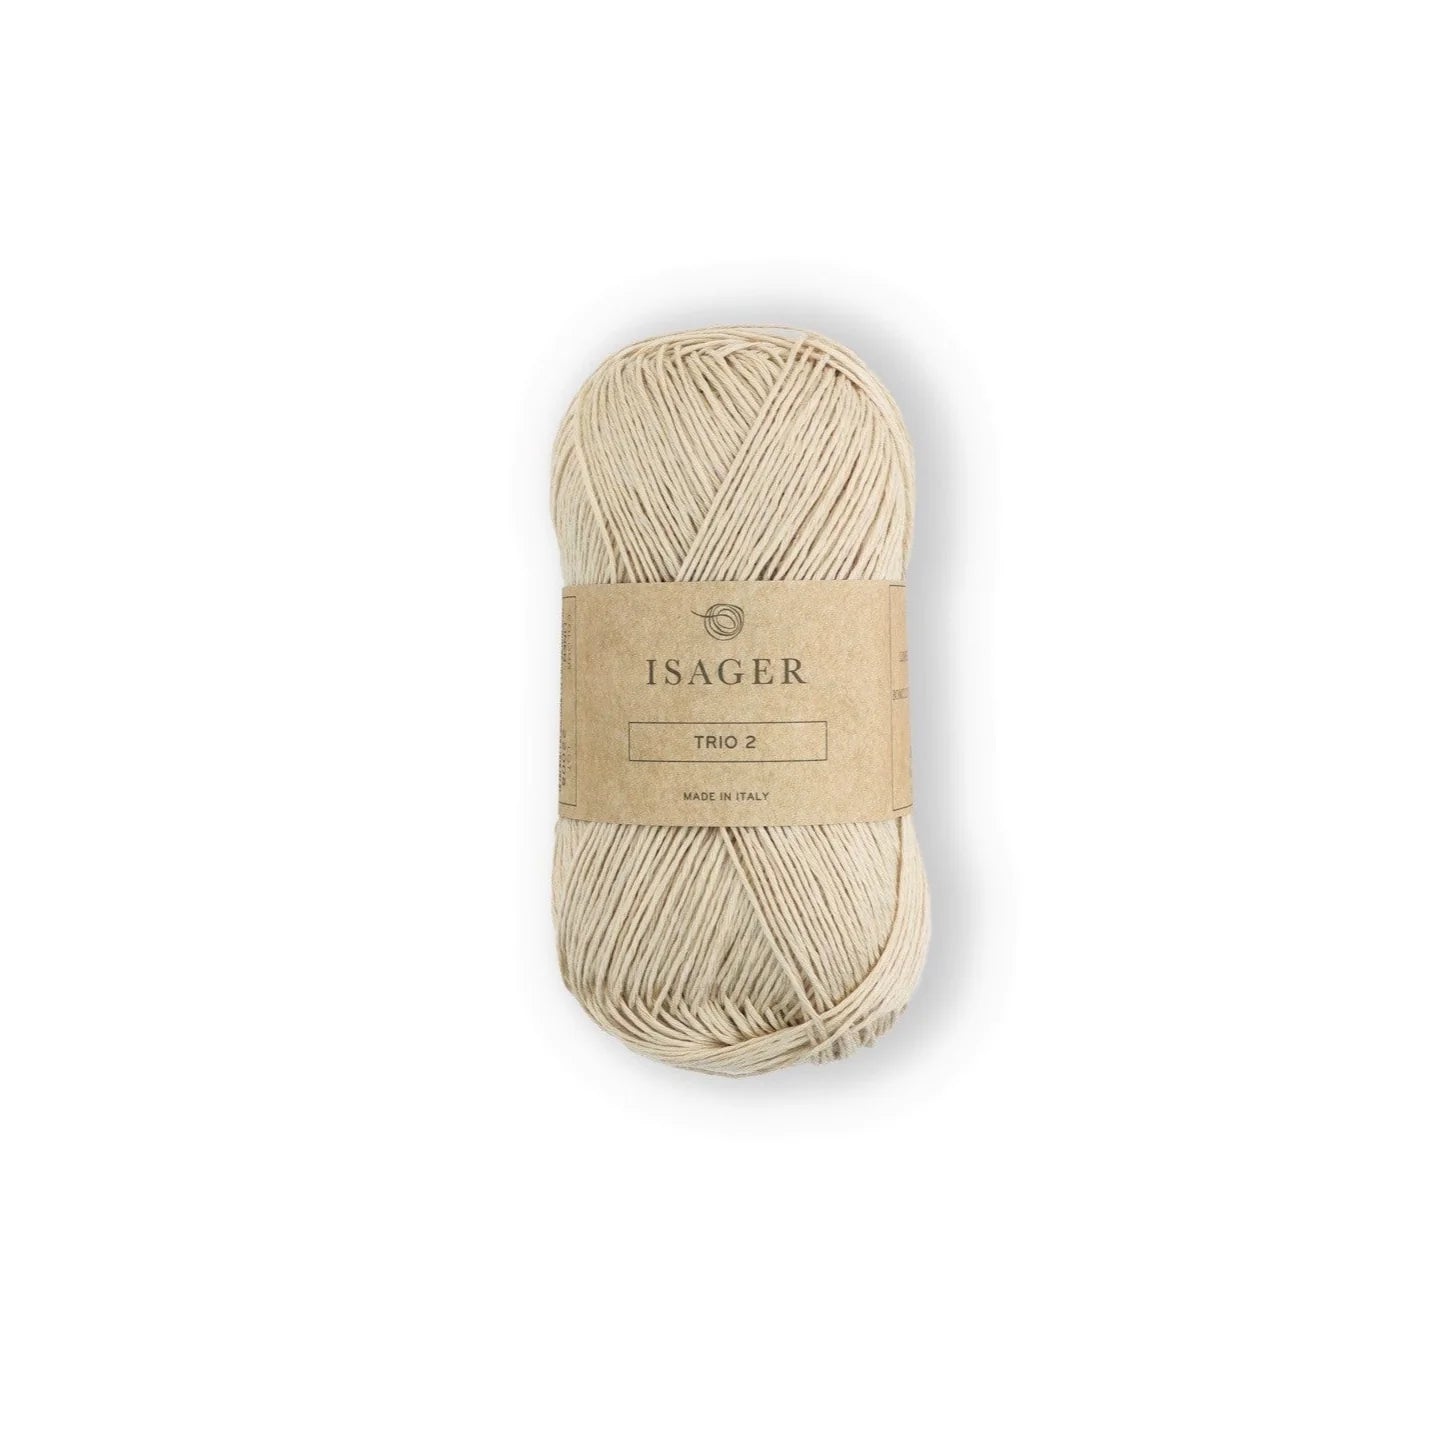 Isager Trio 2 - Linen - 5 Ply - Cotton - The Little Yarn Store